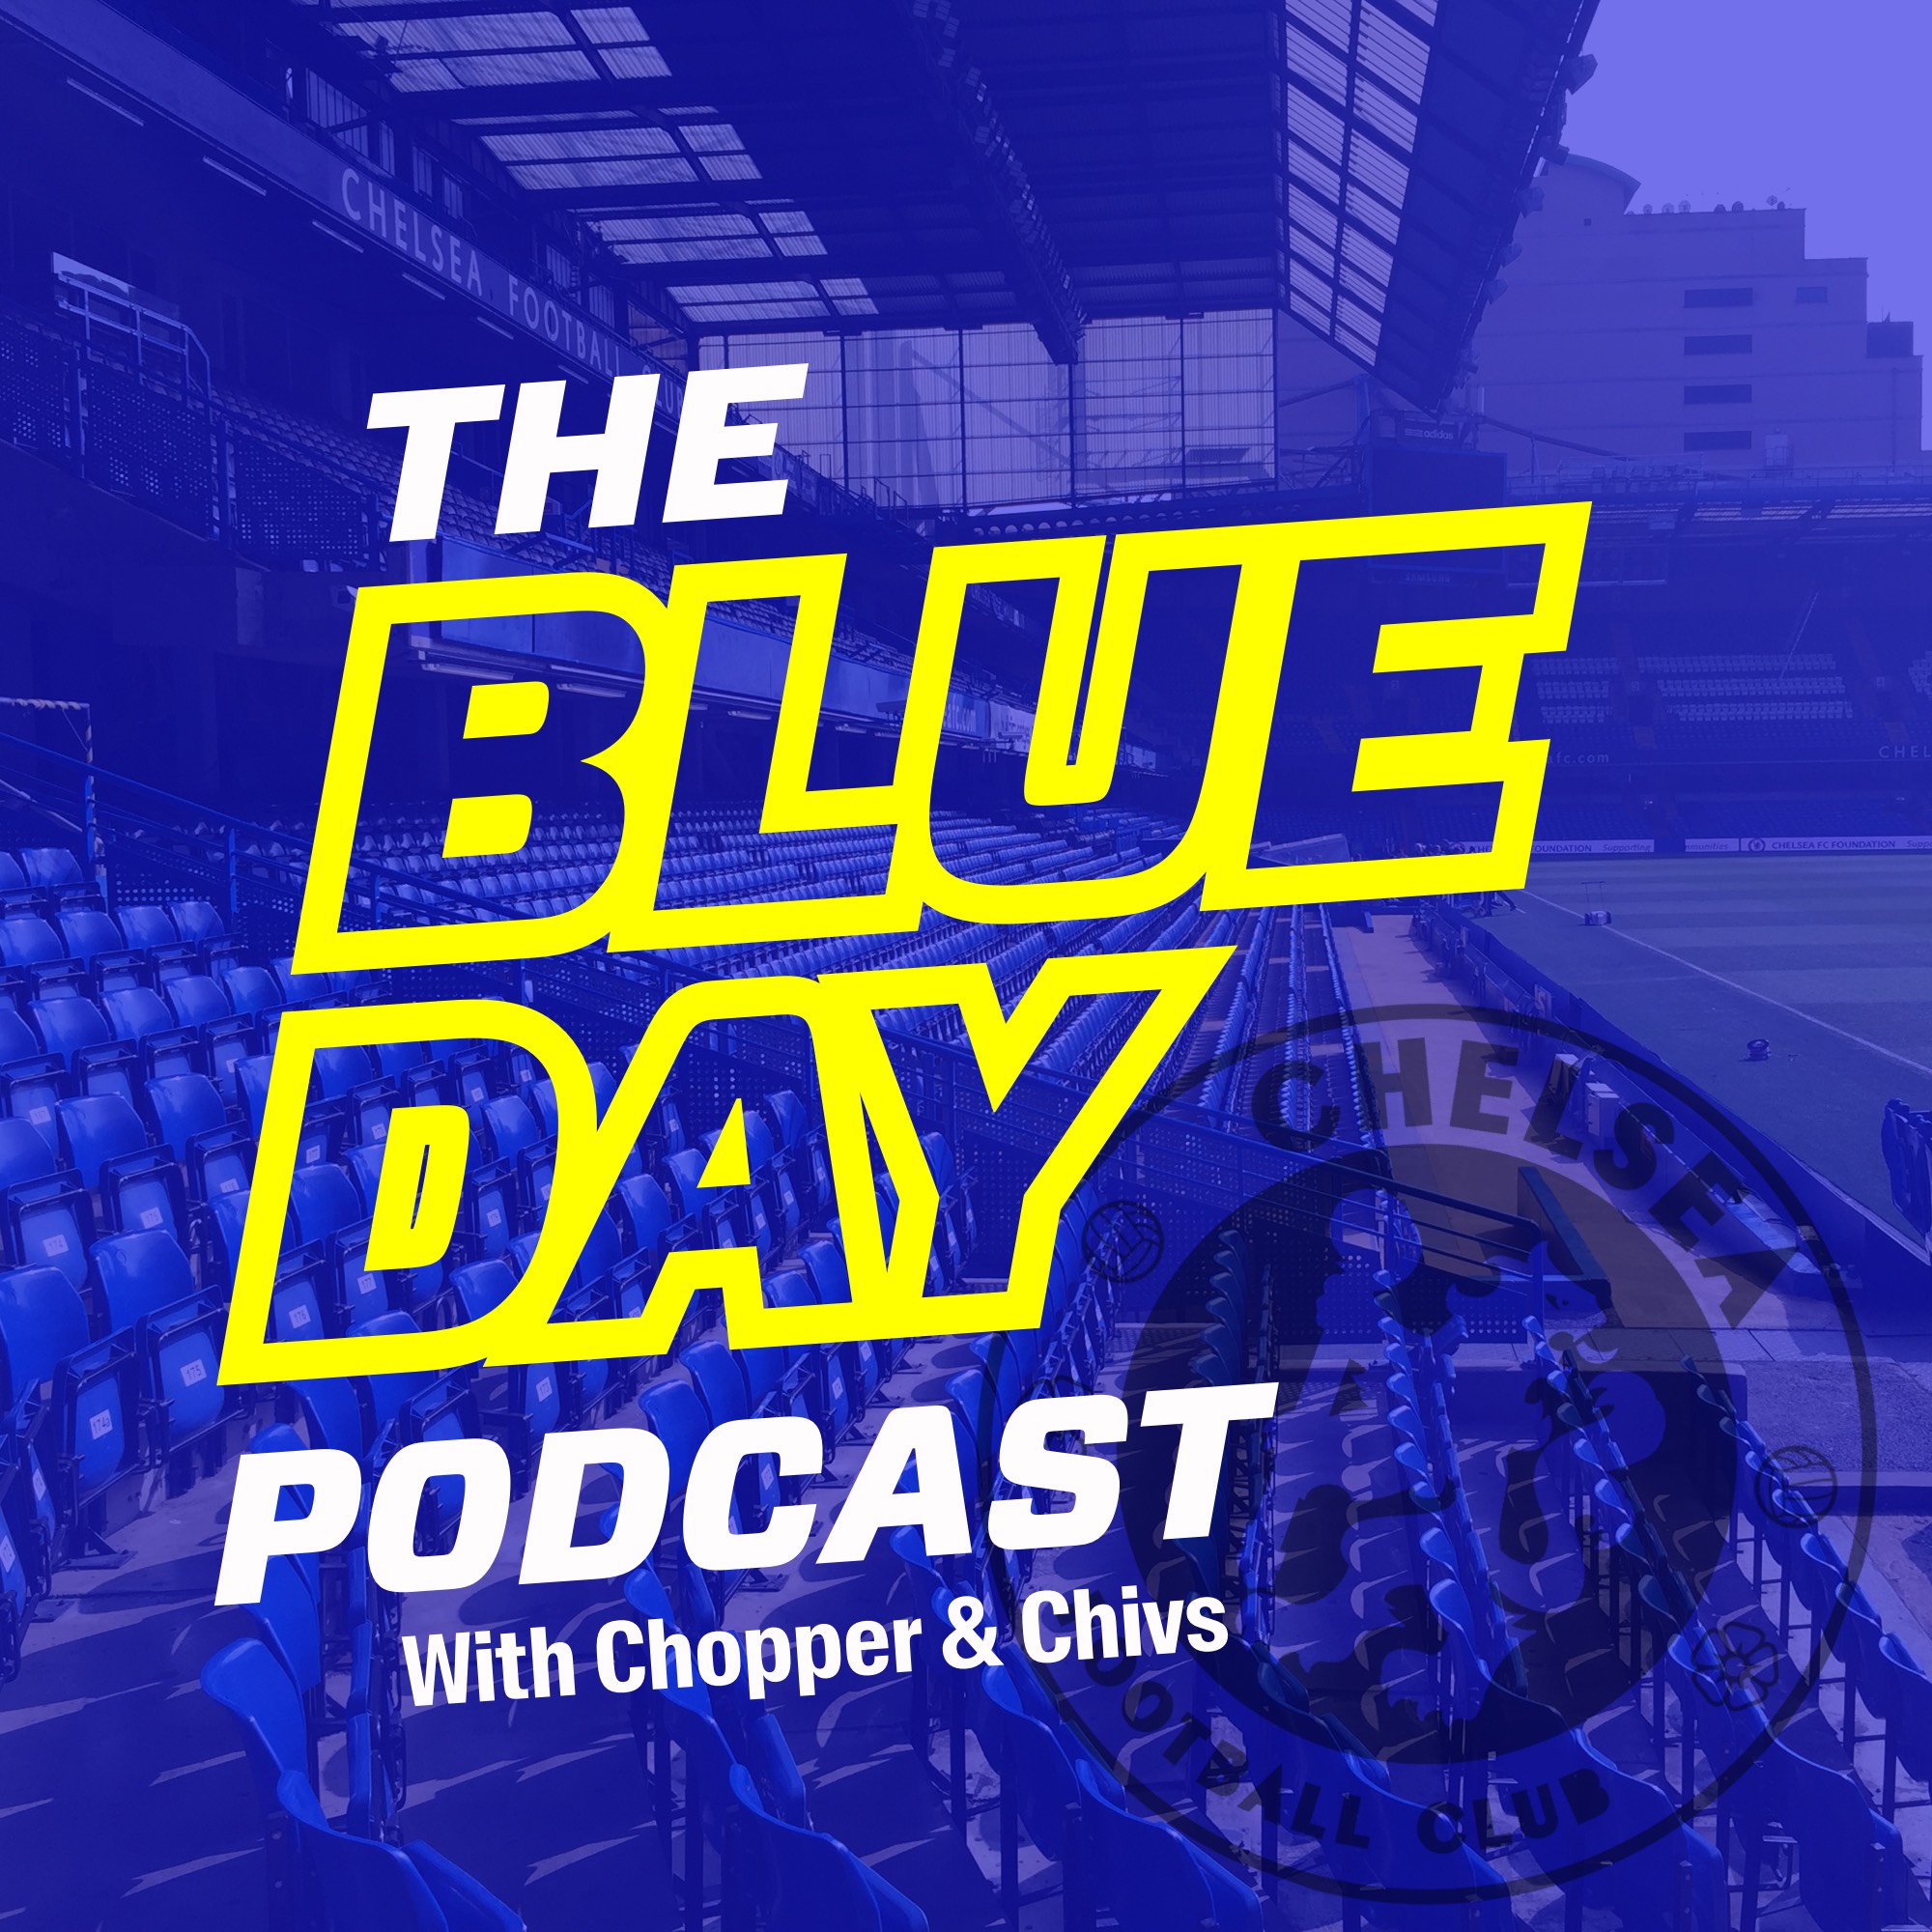 The Blue Day Podcast signs two Chelsea legends!